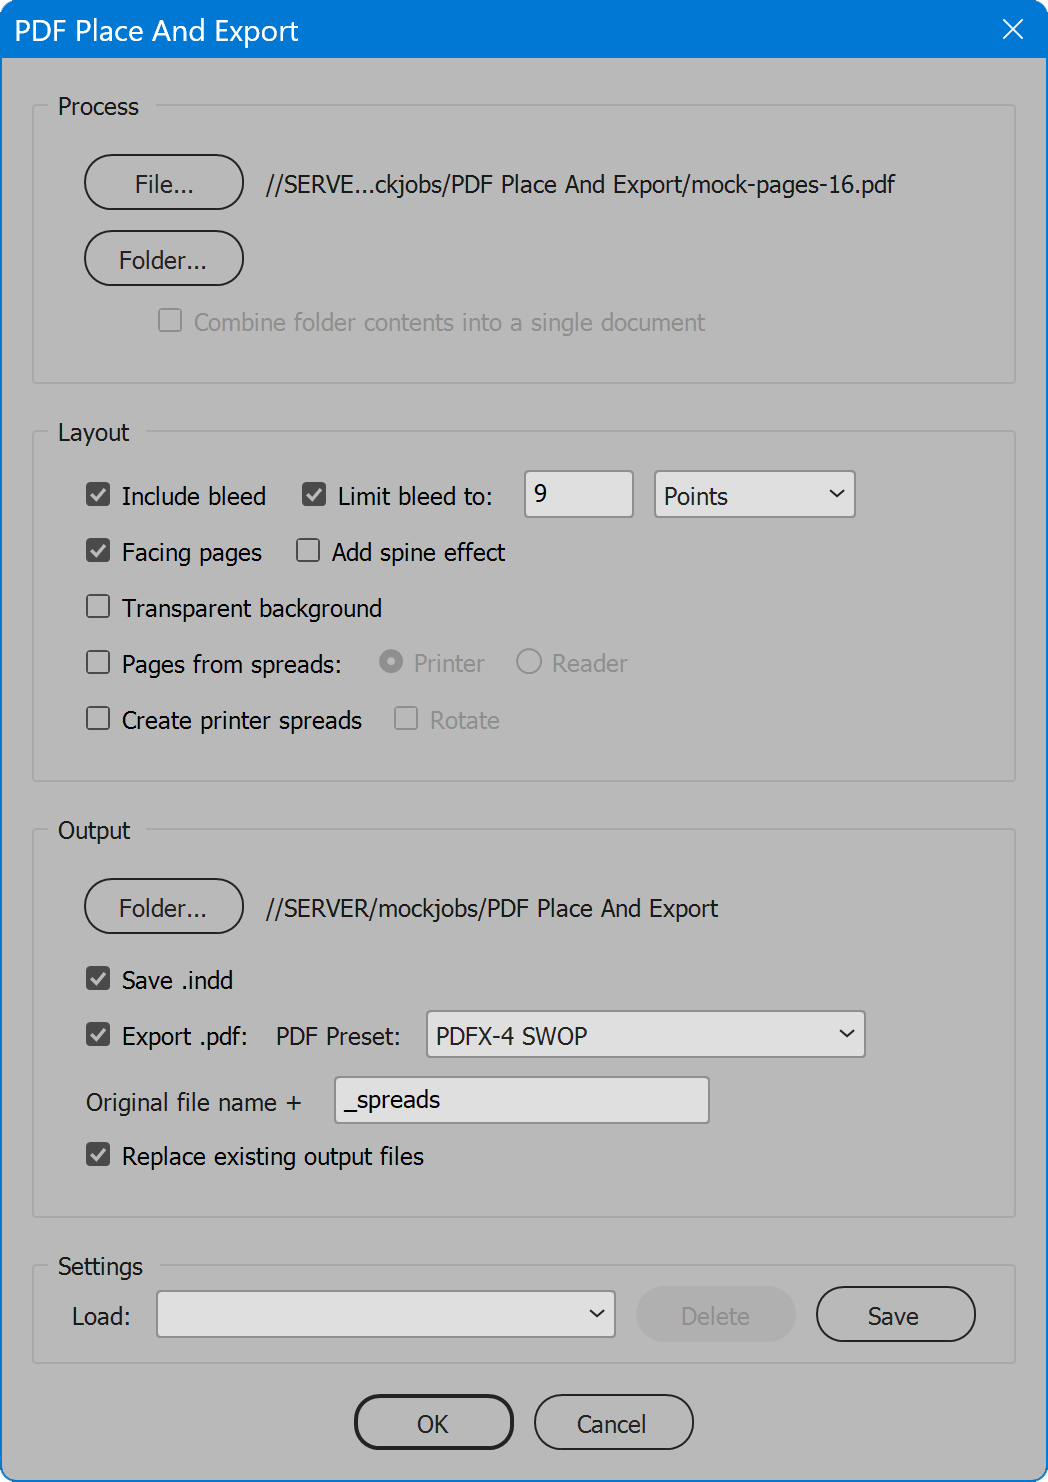 PDF Place And Export